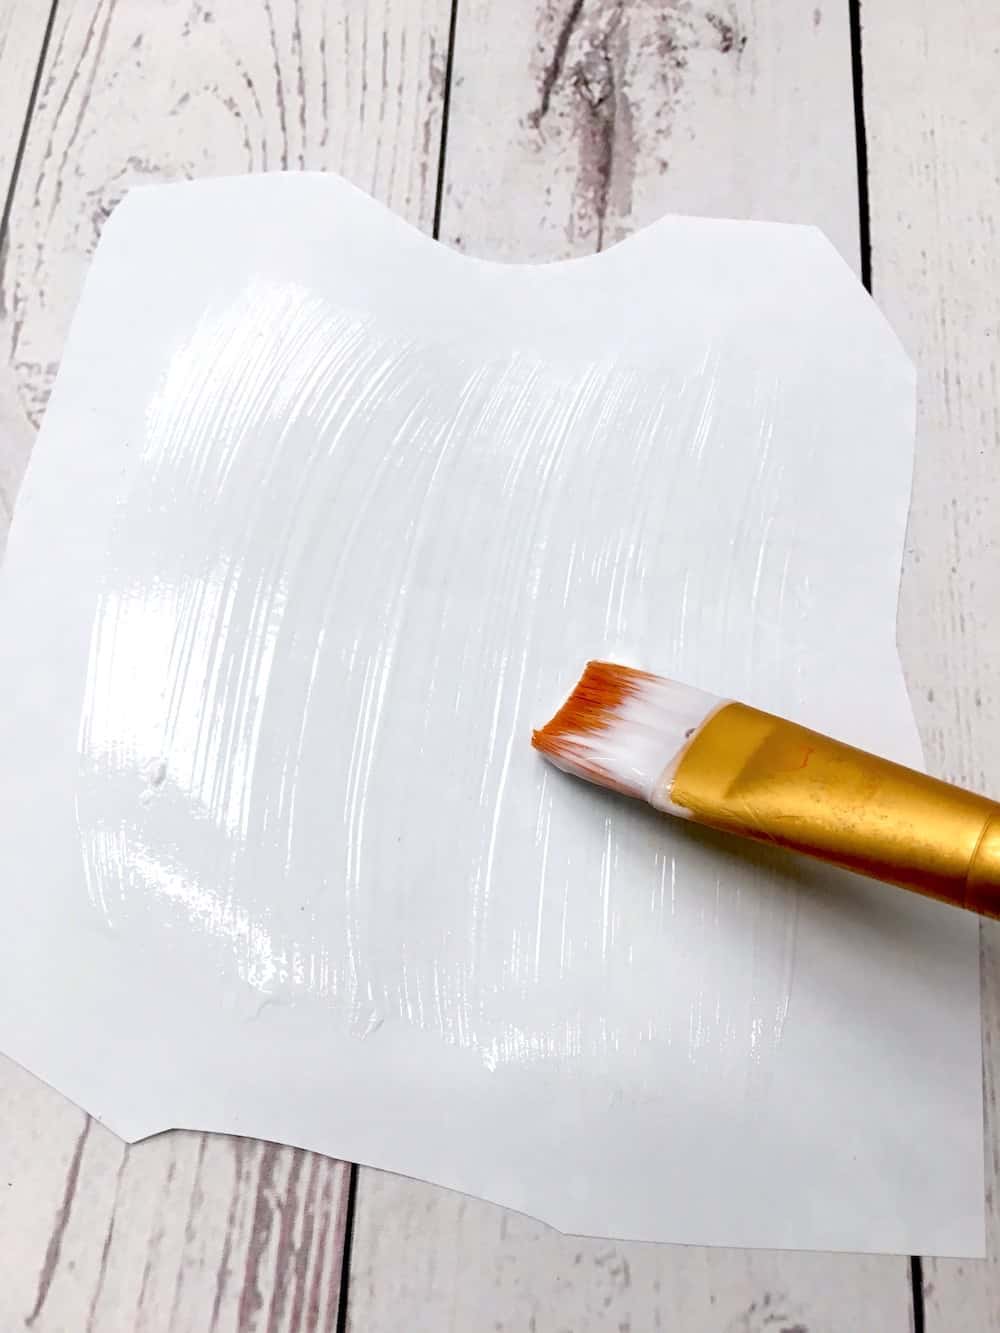 Applying Hard Coat to the back of a coloring page with a brush